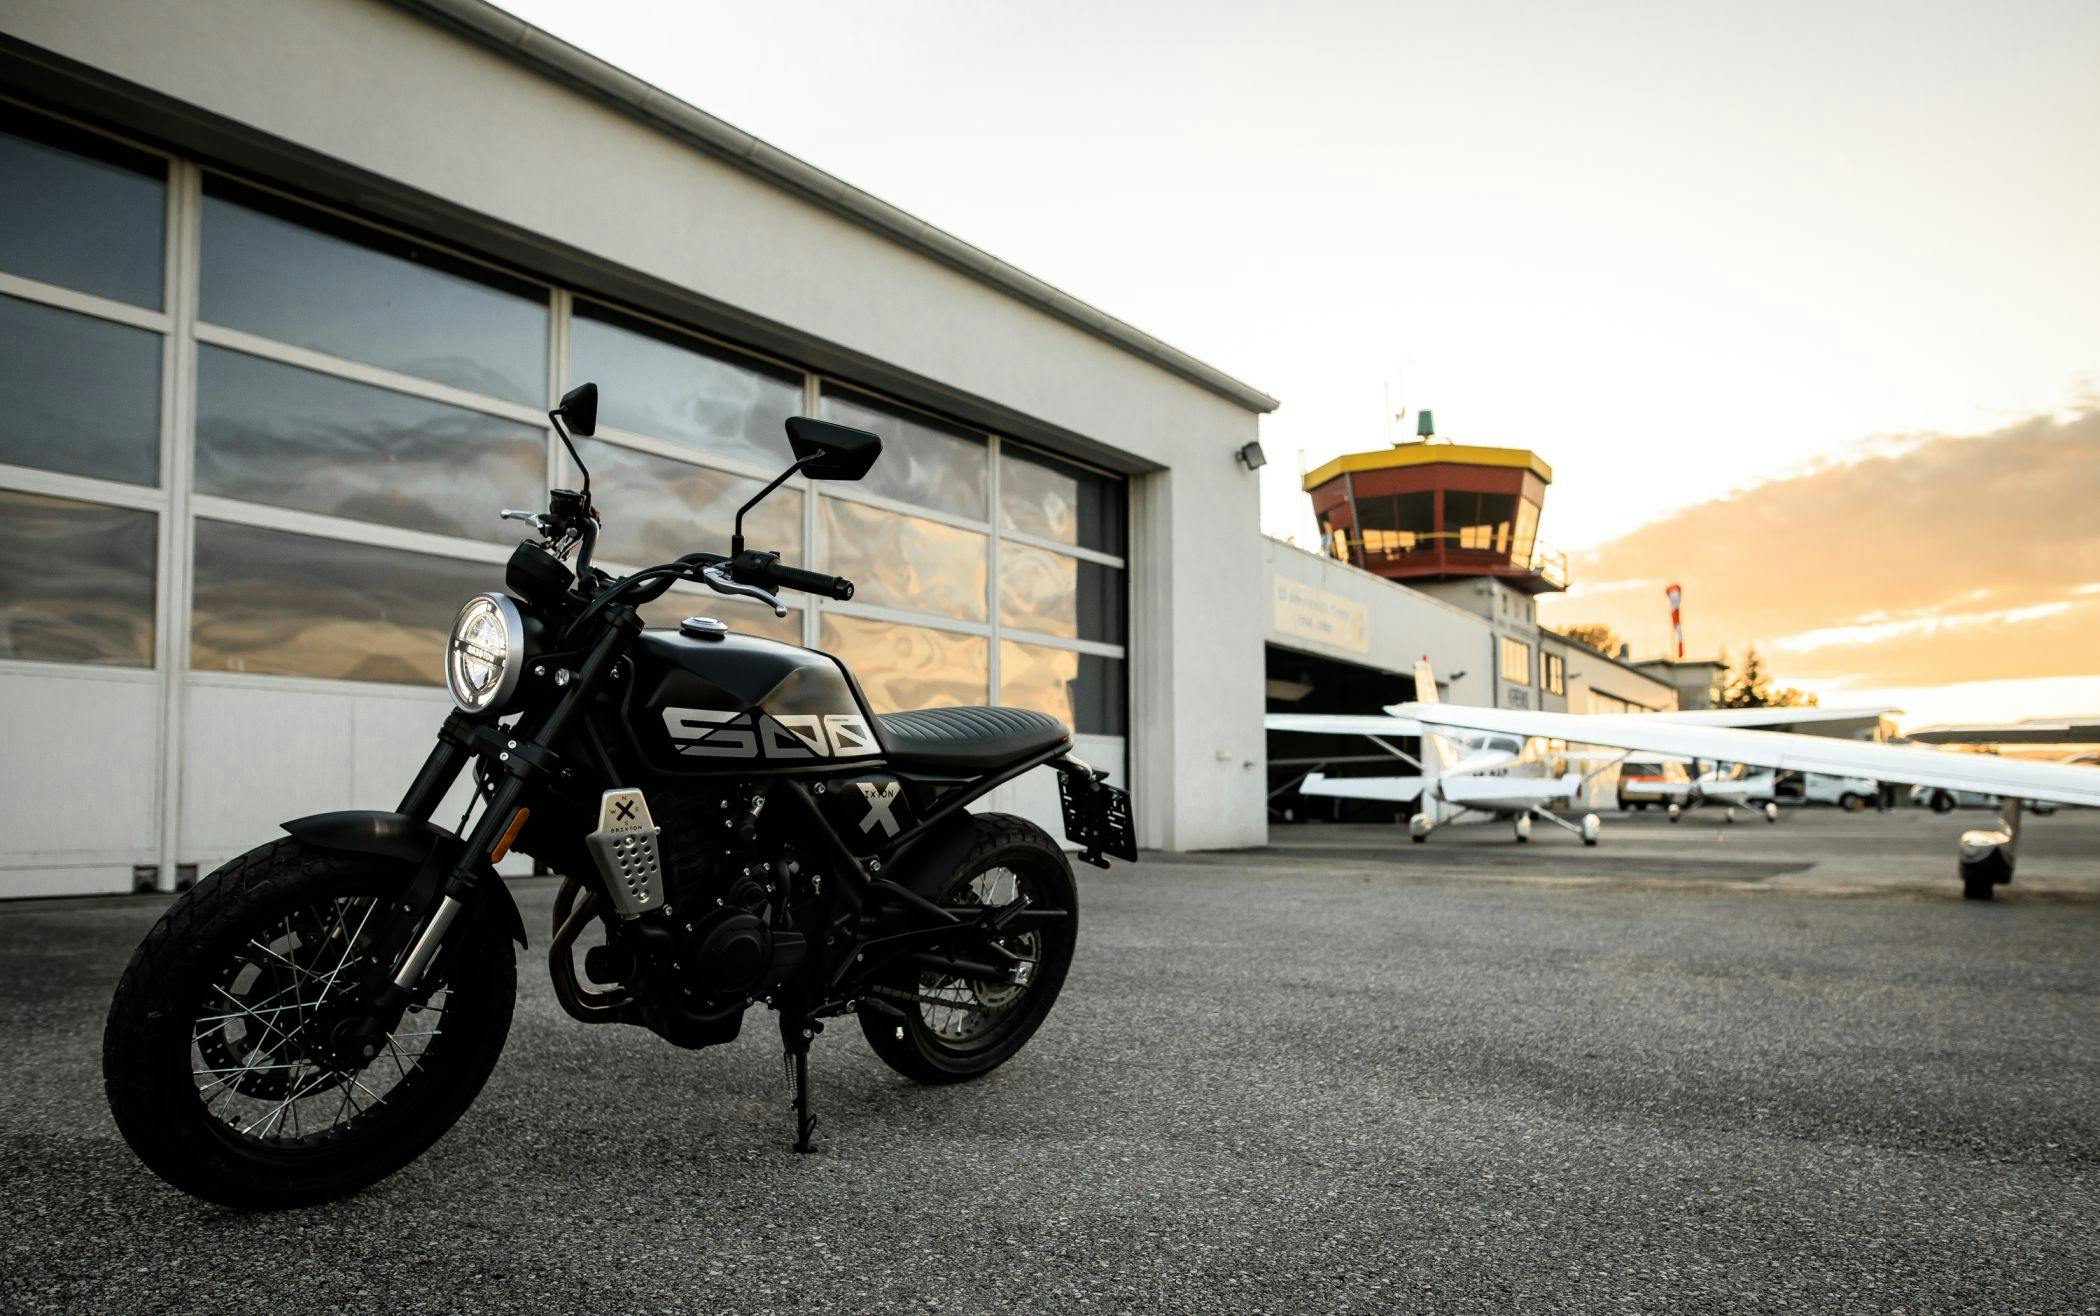 Brixton Crossfire 500 X in Backstage Black parked on an airfield in front of a hangar